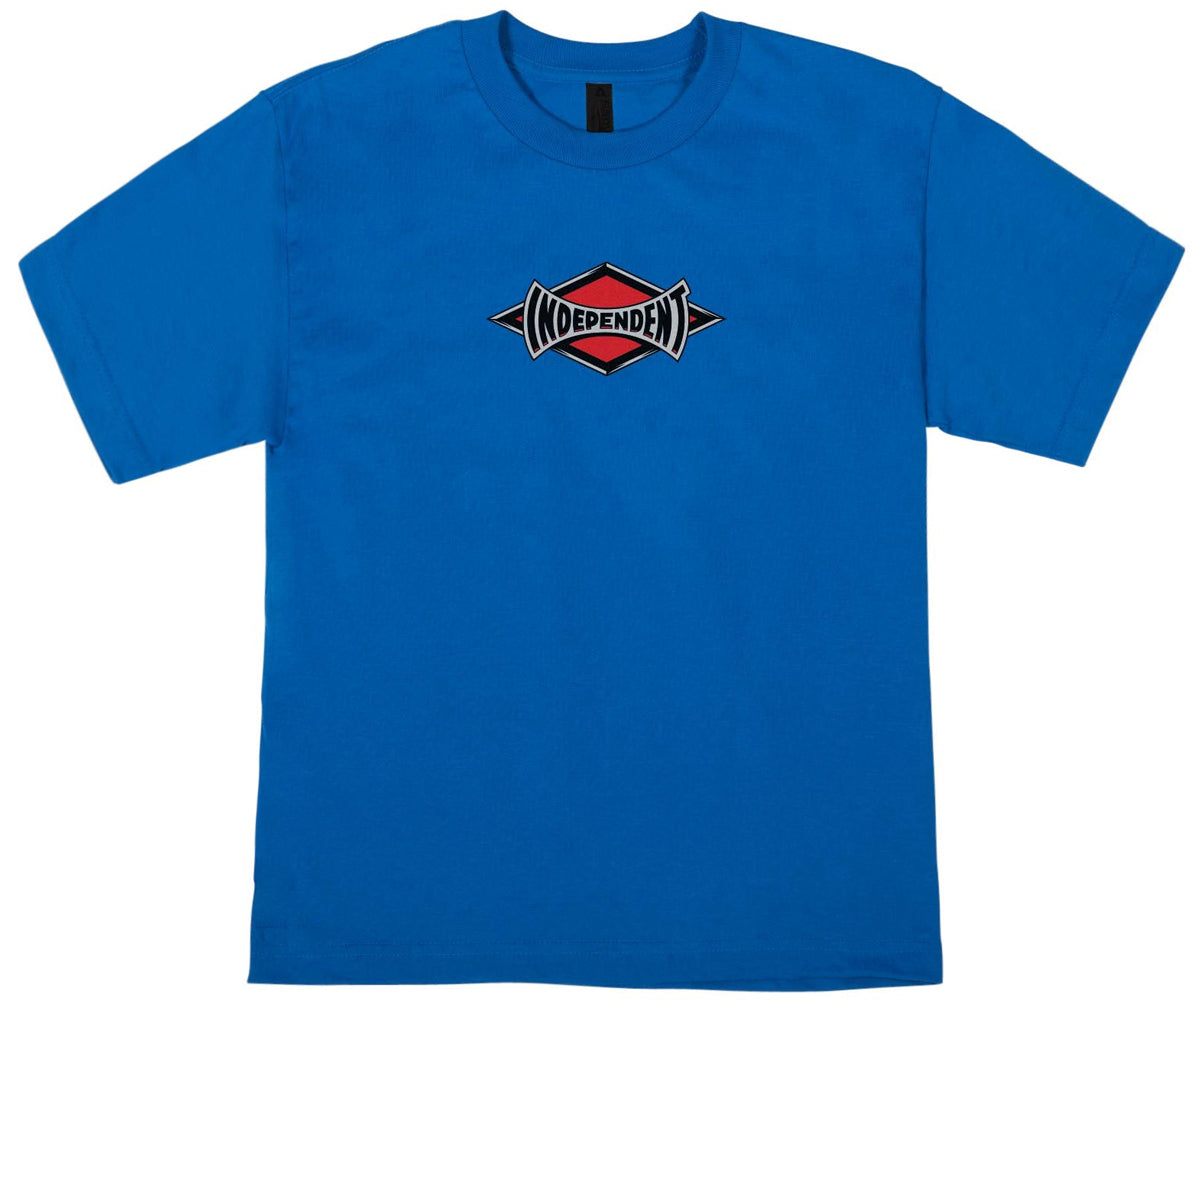 Independent Youth Legacy T-Shirt - Royal image 2